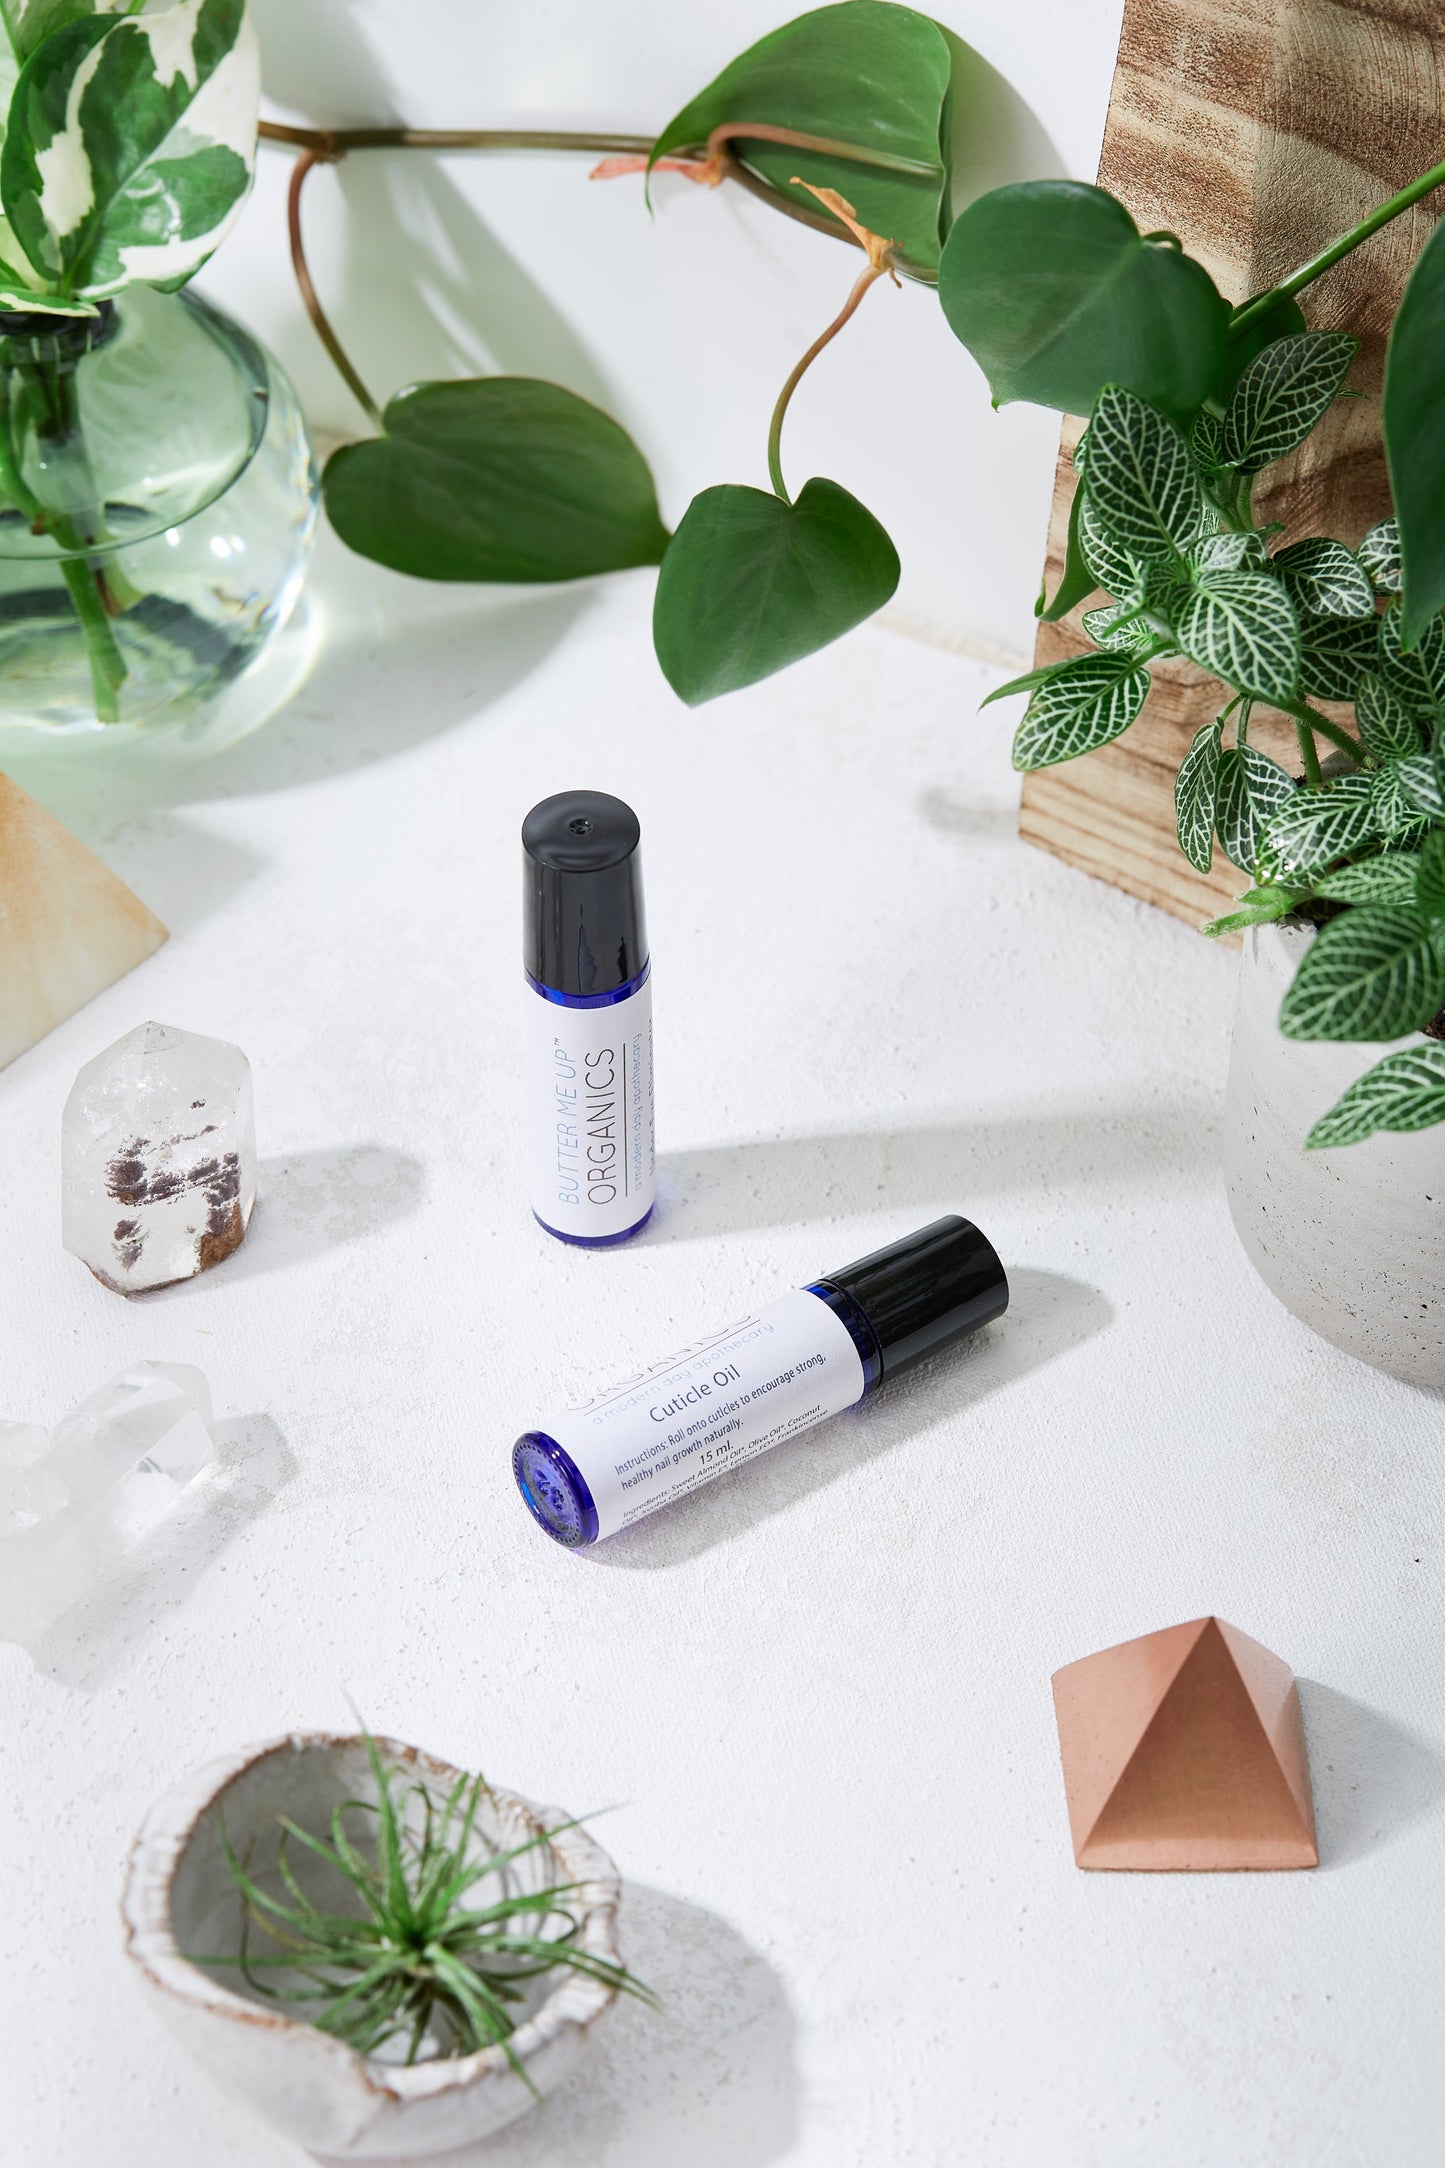 Two bottles of Organic Cuticle Oil by White Smokey on a white surface surrounded by green plants, crystals, and organic ingredients.